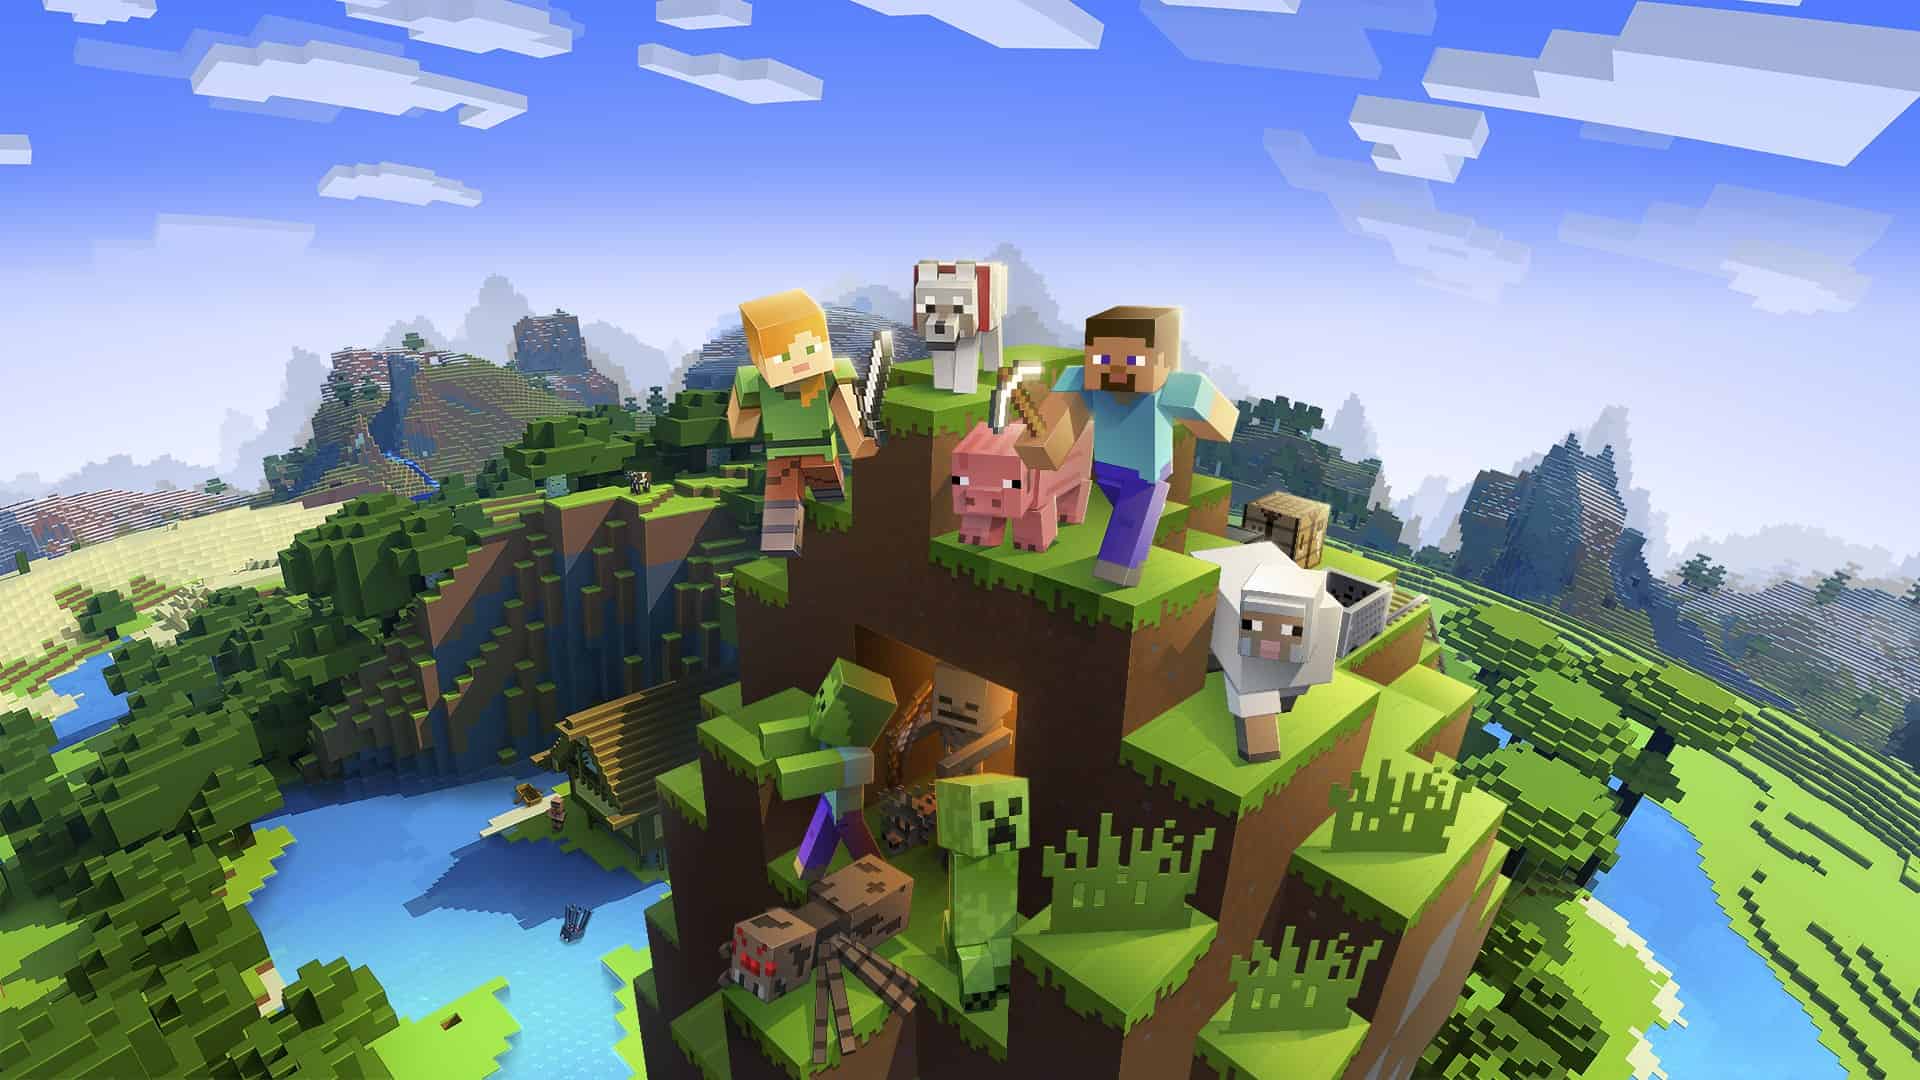 Each child has been given a plot of land on the server, image via Mojang